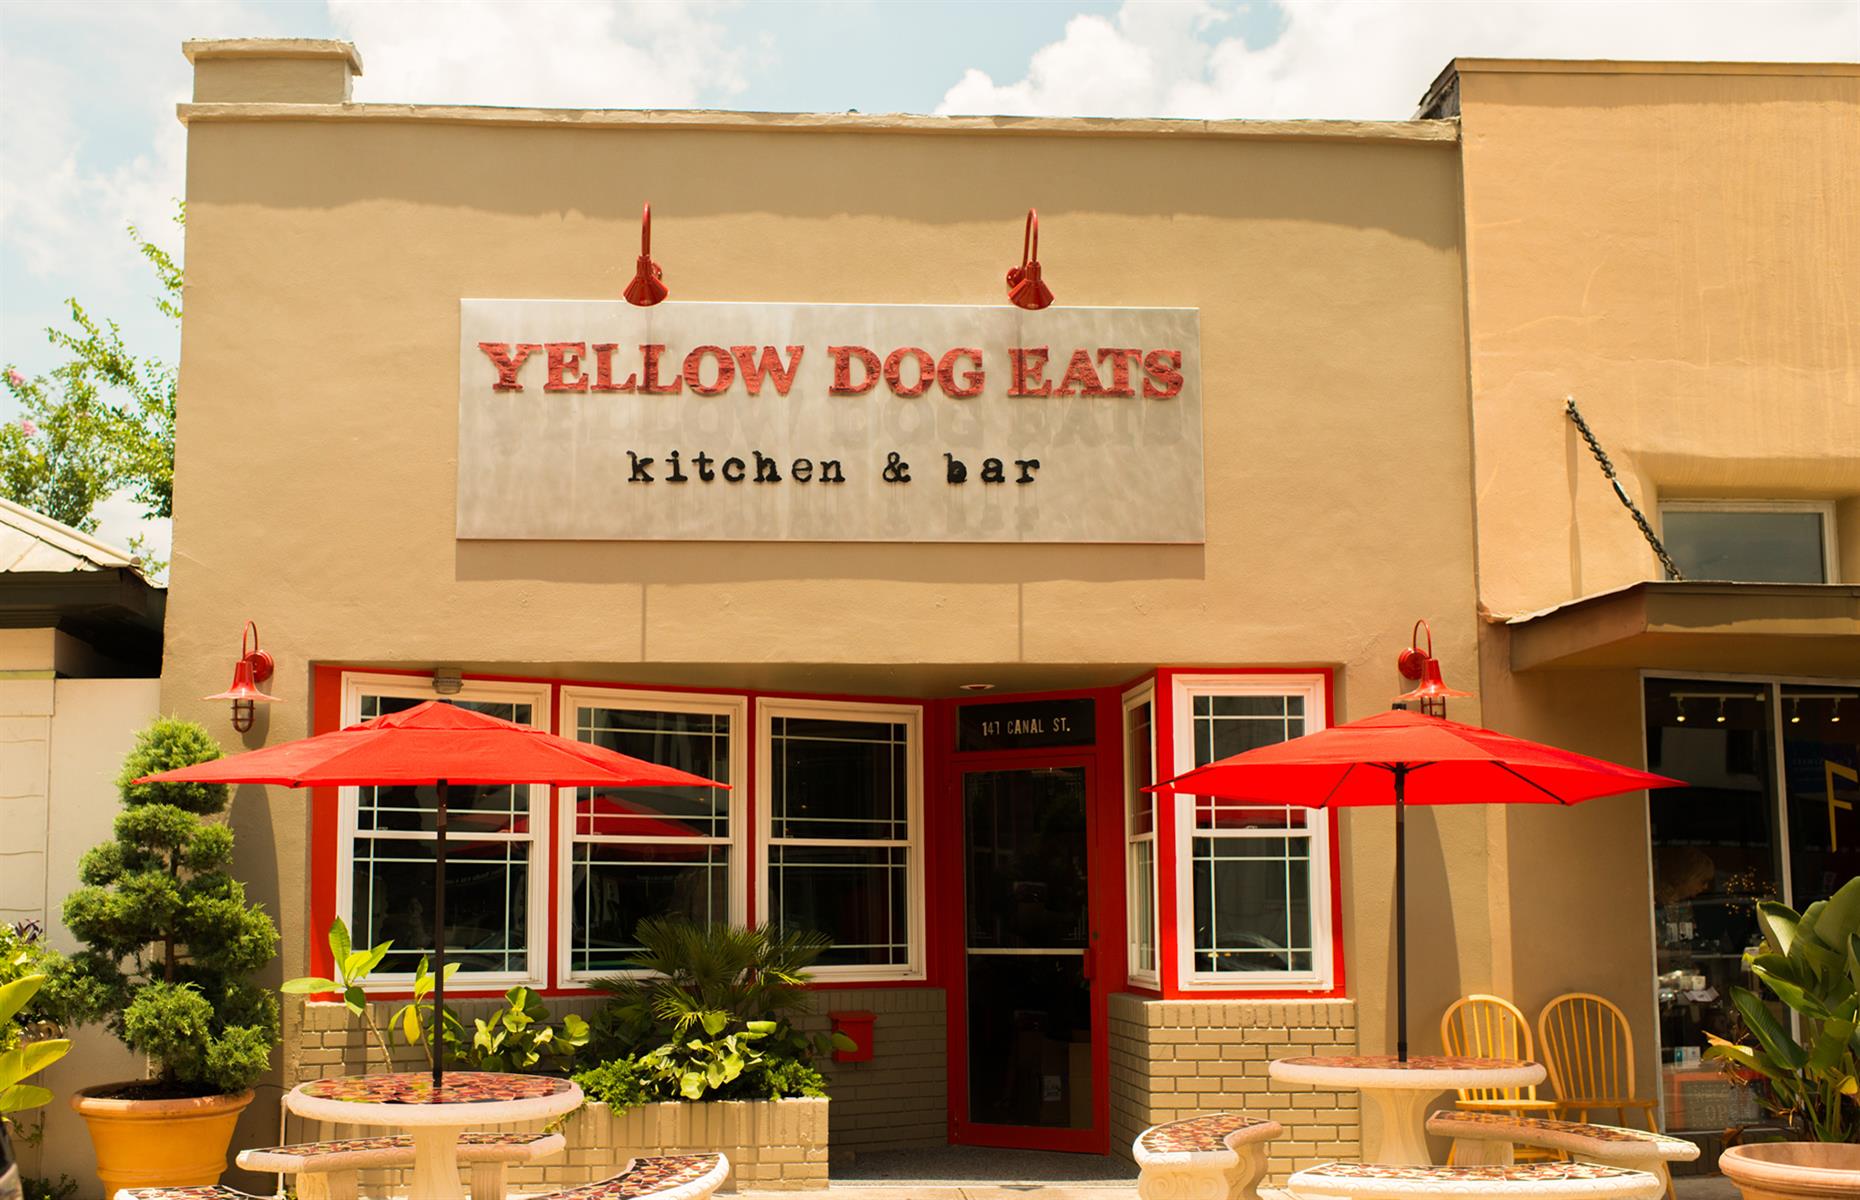 <p>Just a block away from the shores of the Indian River North in New Smyrna Beach – Florida's answer to the Hamptons – <a href="https://www.facebook.com/YDEkitchenbar/">Yellow Dog Eats Kitchen and Bar</a> has <a href="https://www.yelp.com/biz/yellow-dog-eats-kitchen-and-bar-new-smyrna-beach">an epic menu</a>. Expect pulled pork sandwiches, Mexican wraps, vegetarian nachos and tacos, plus other sandwiches featuring fresh salmon, tuna or turkey with maple roasted bacon. There's craft beer on tap and a decent wine list, and the dogs will get plenty of fuss when you visit. </p>